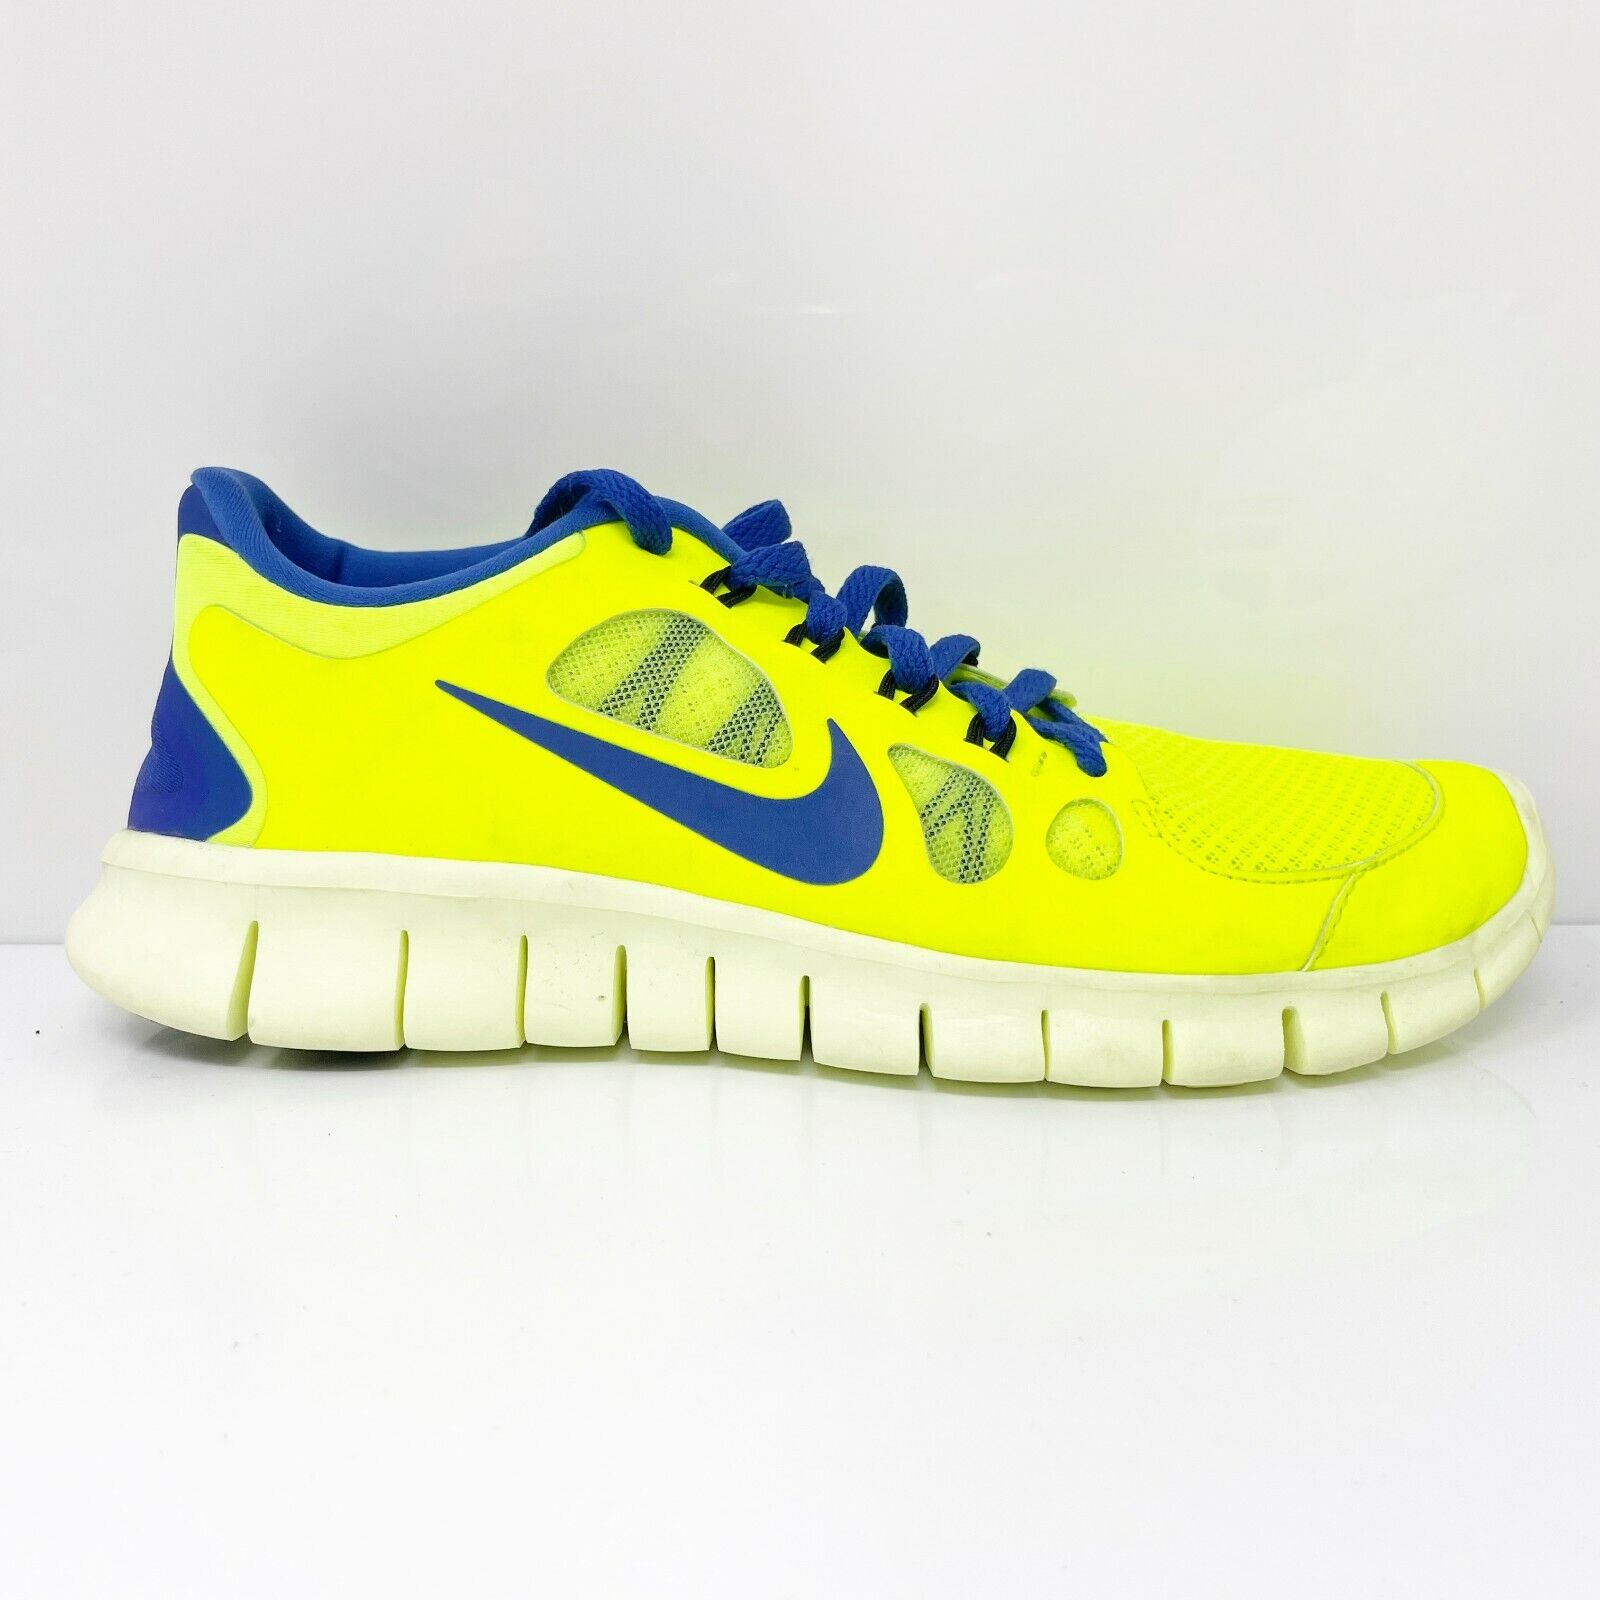 Nike Financial sales sale Boys Free 5.0 580558-700 Yellow 6.5Y Blue Shoes Rapid rise Running Sneakers Size